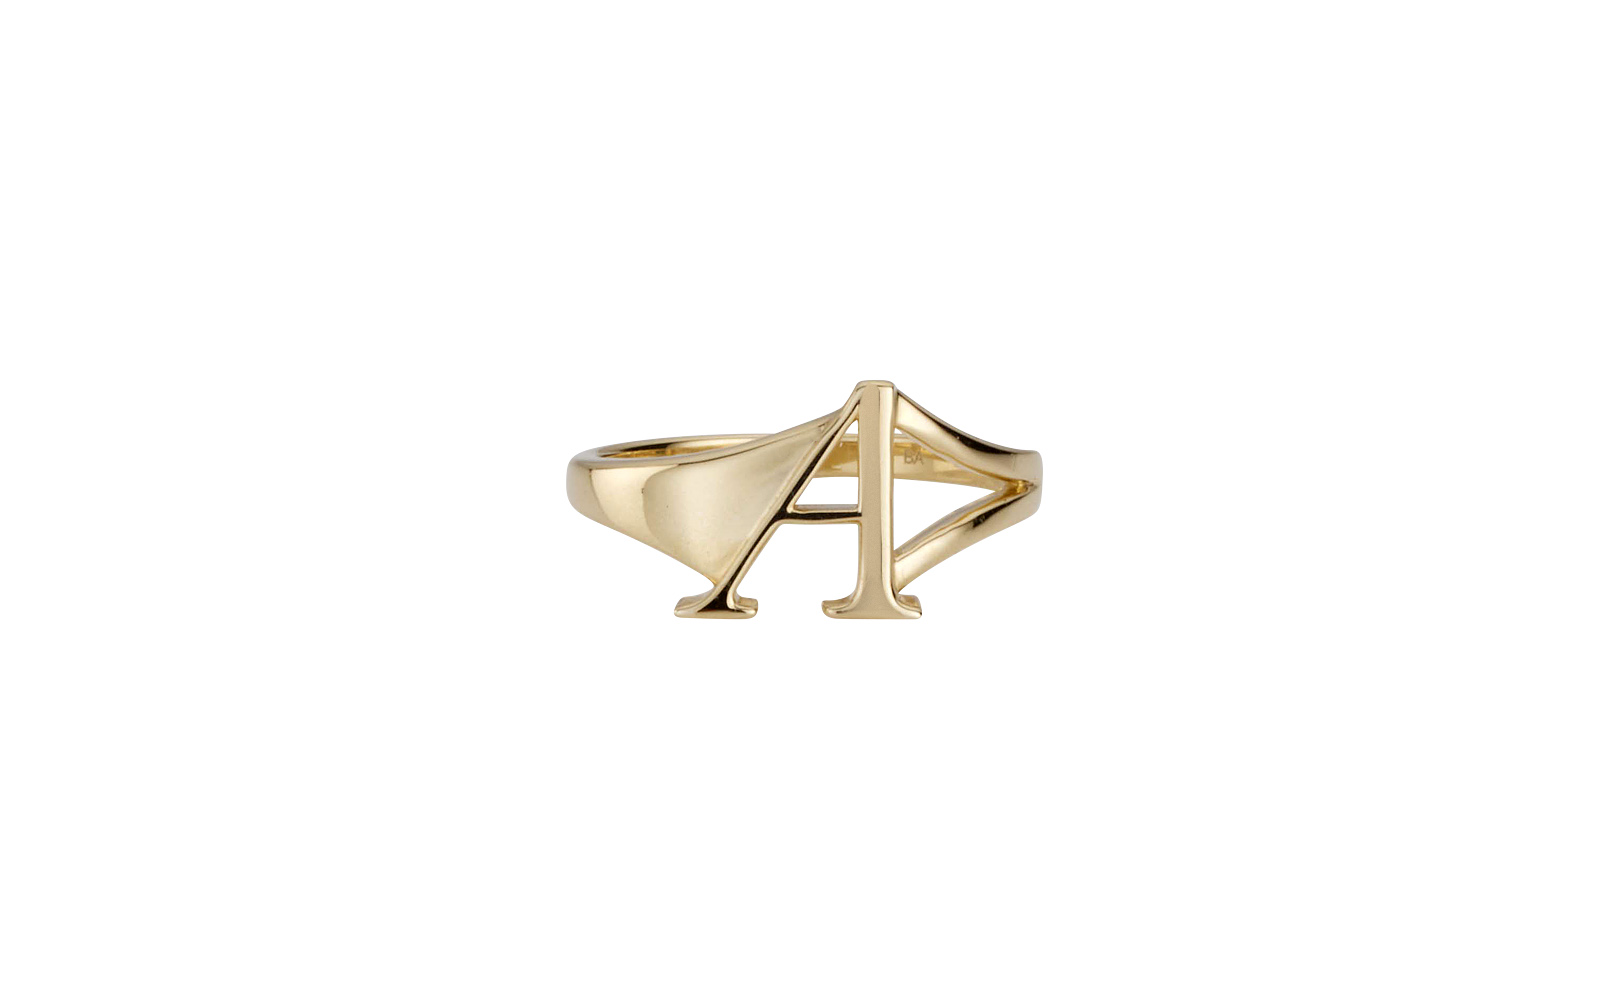 Initial Signet Ring Yellow Gold